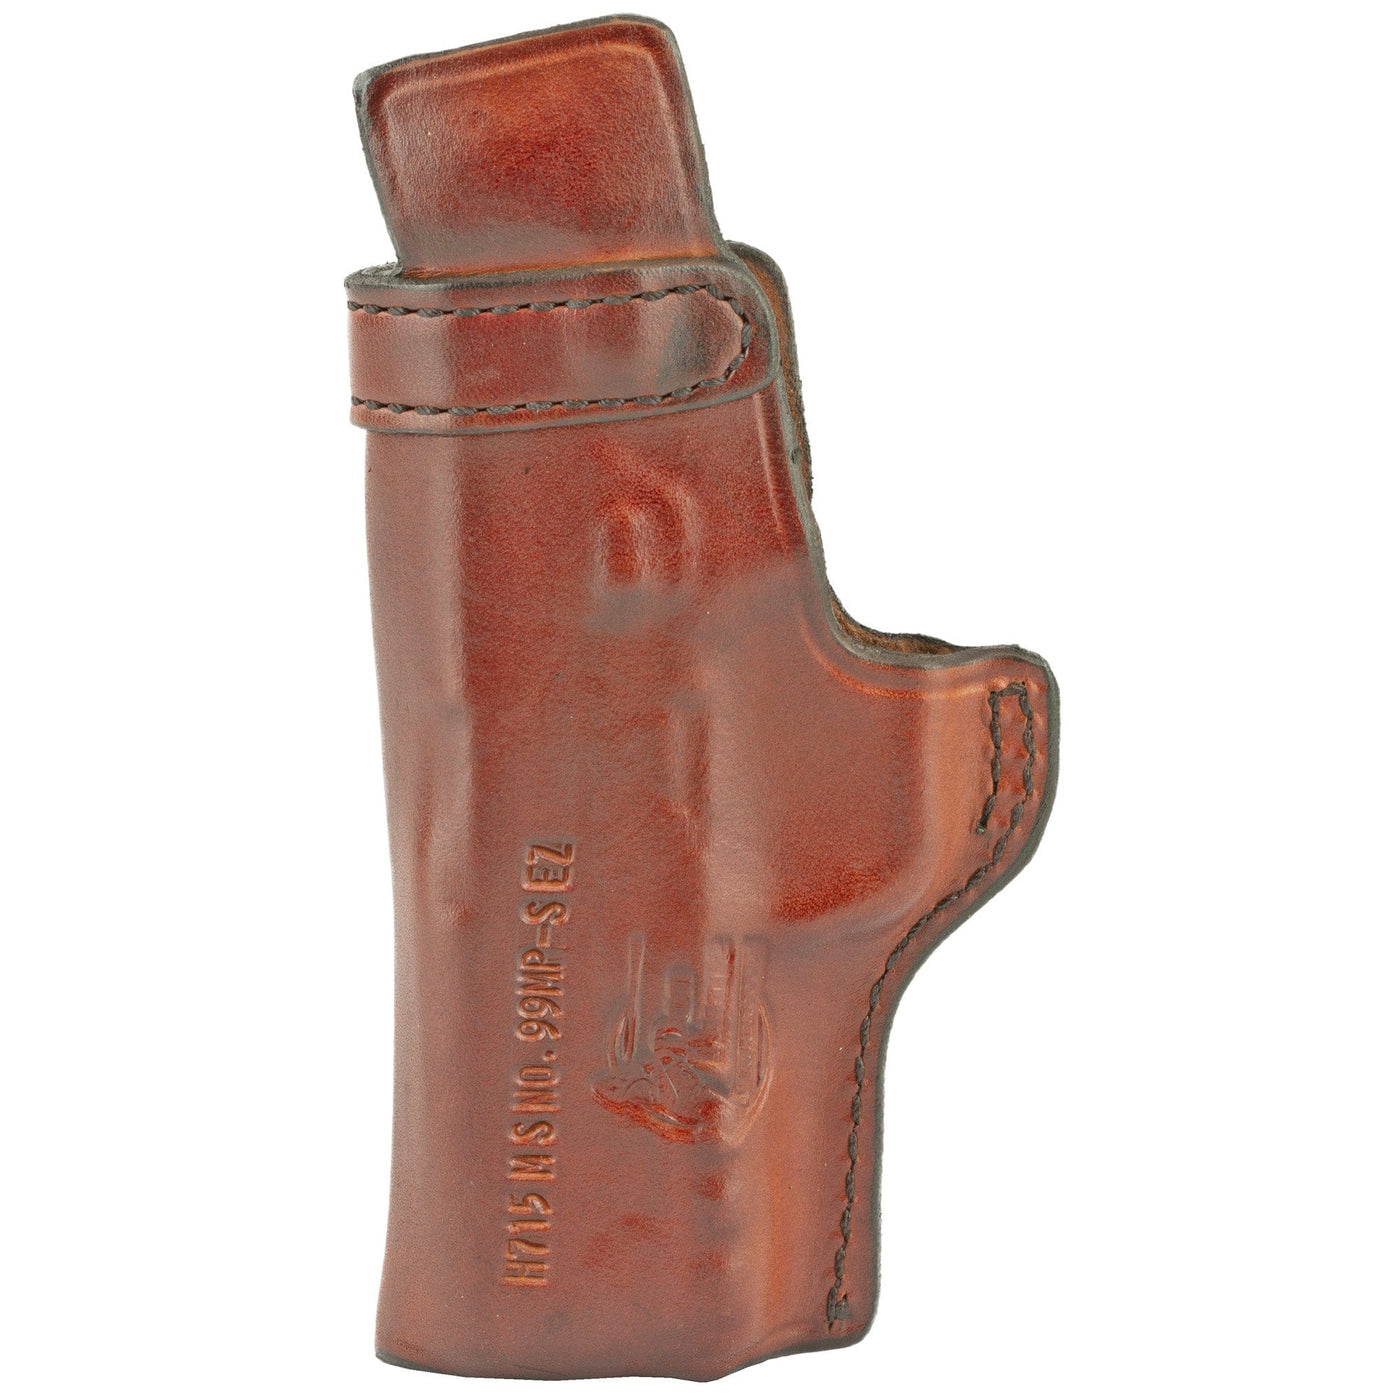 Don Hume D Hume H715m Wcs Sw Mp9 Shldez Rh Bronze Holsters